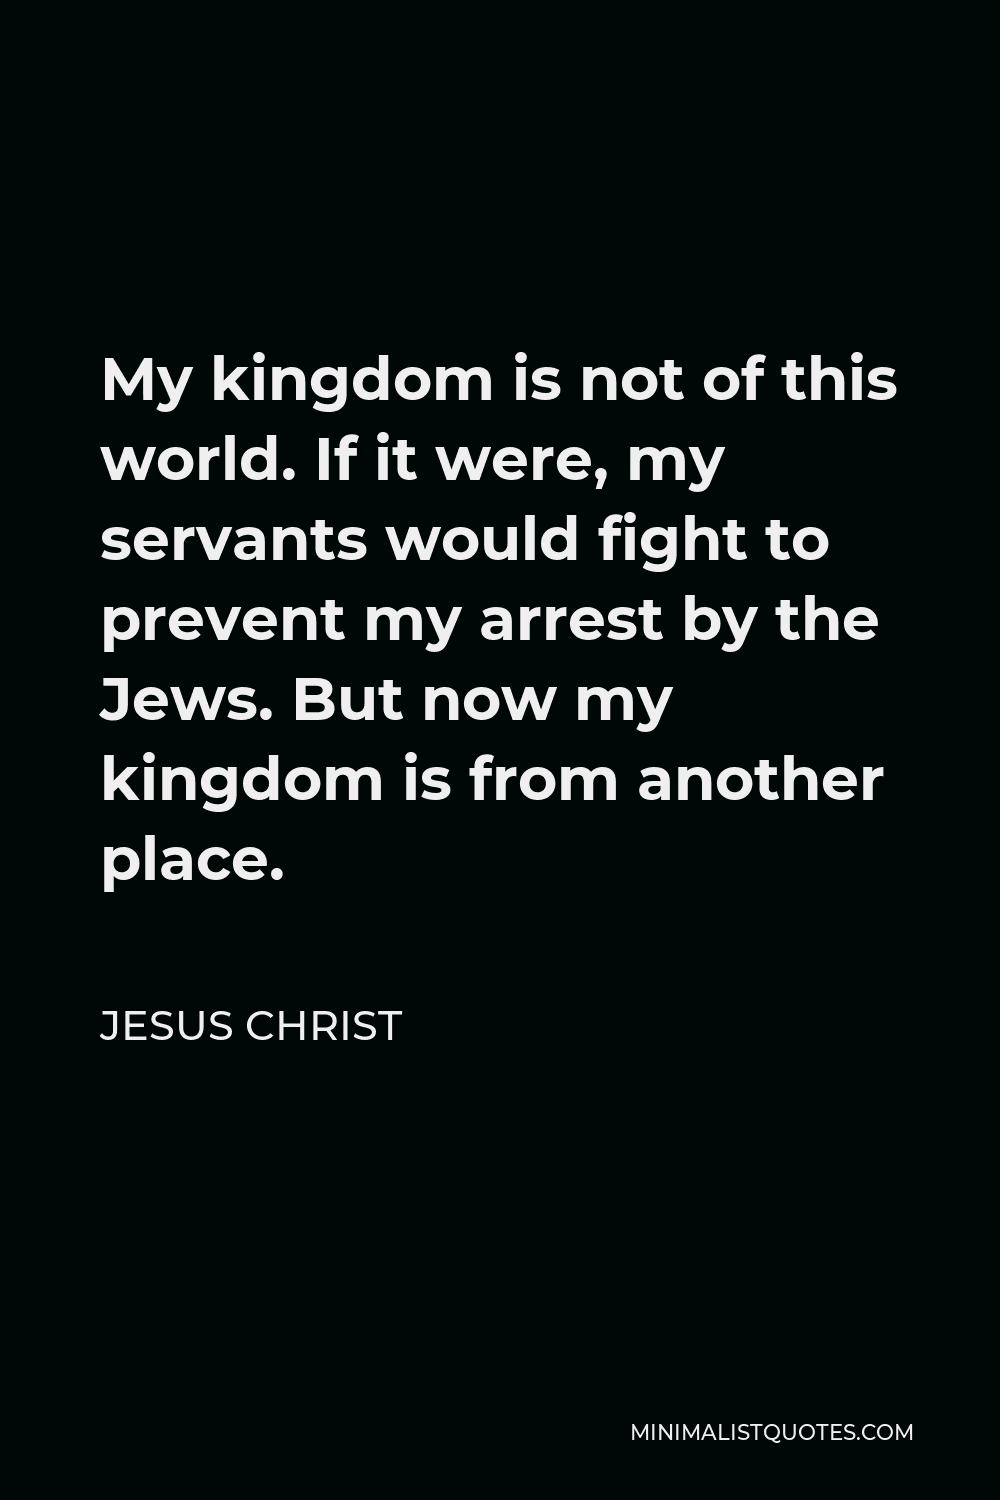 A quote from Jesus Christ: “My kingdom is not of this world:”